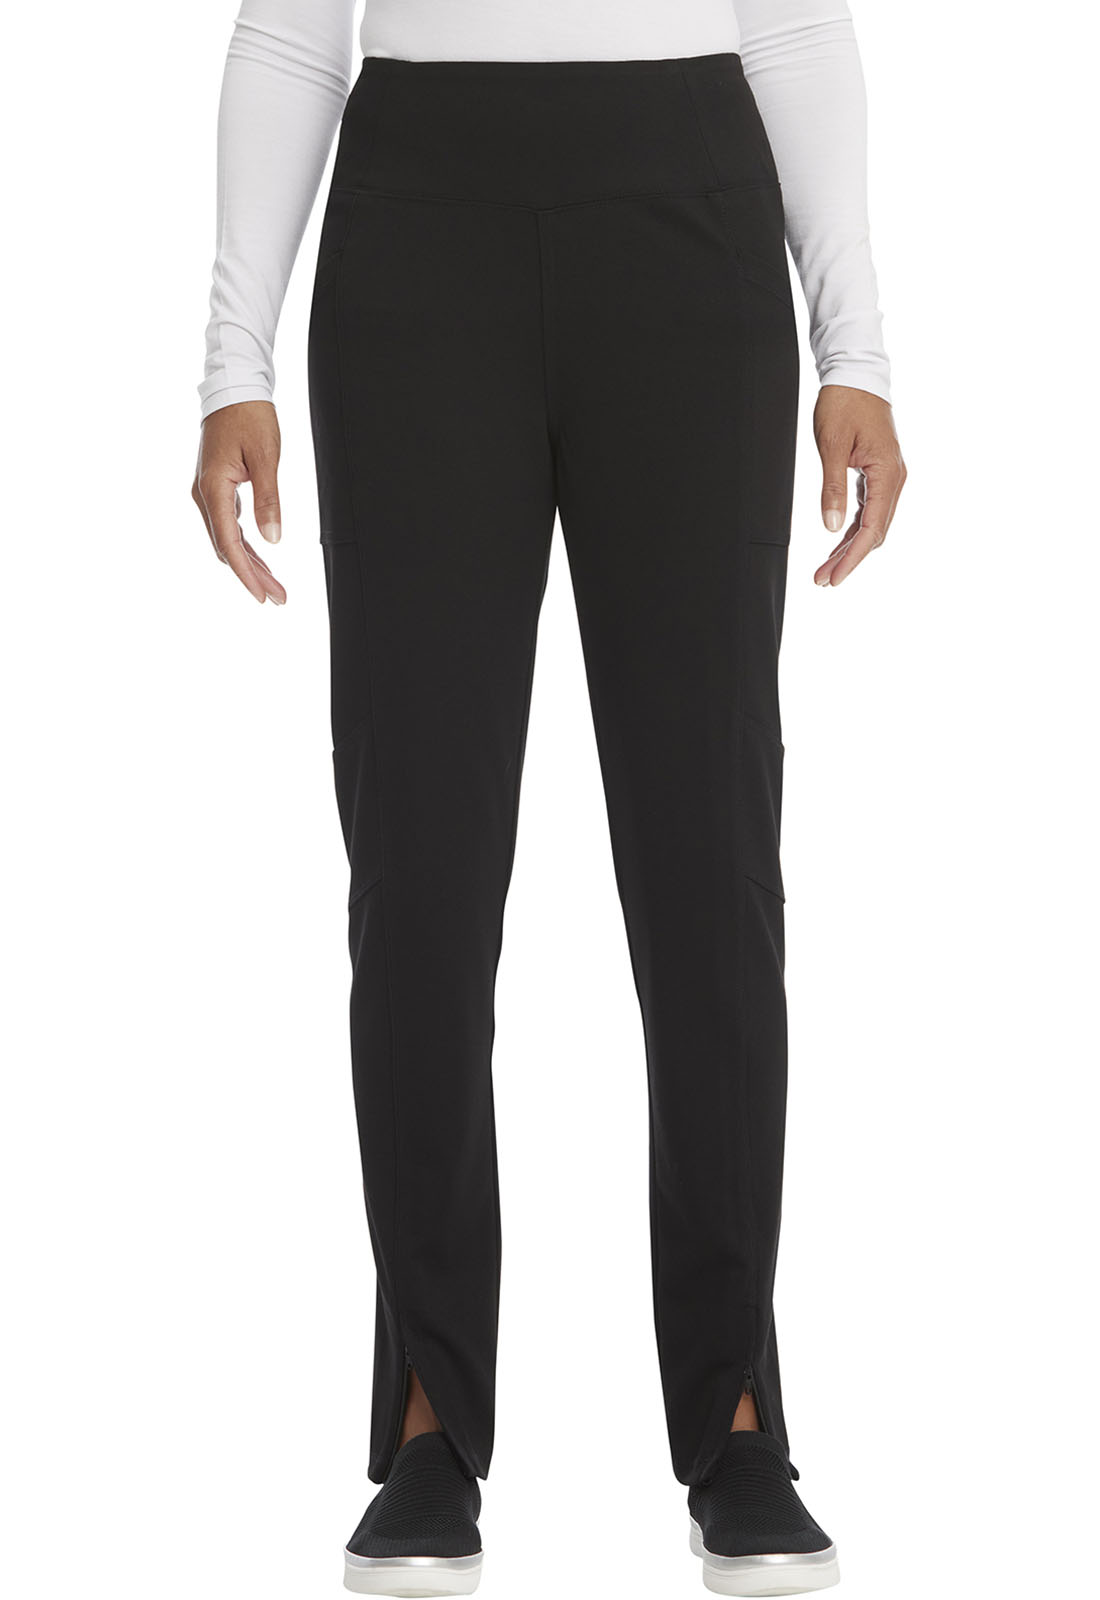 High Waisted Yoga Pant WD053-BLK from Scrubstar